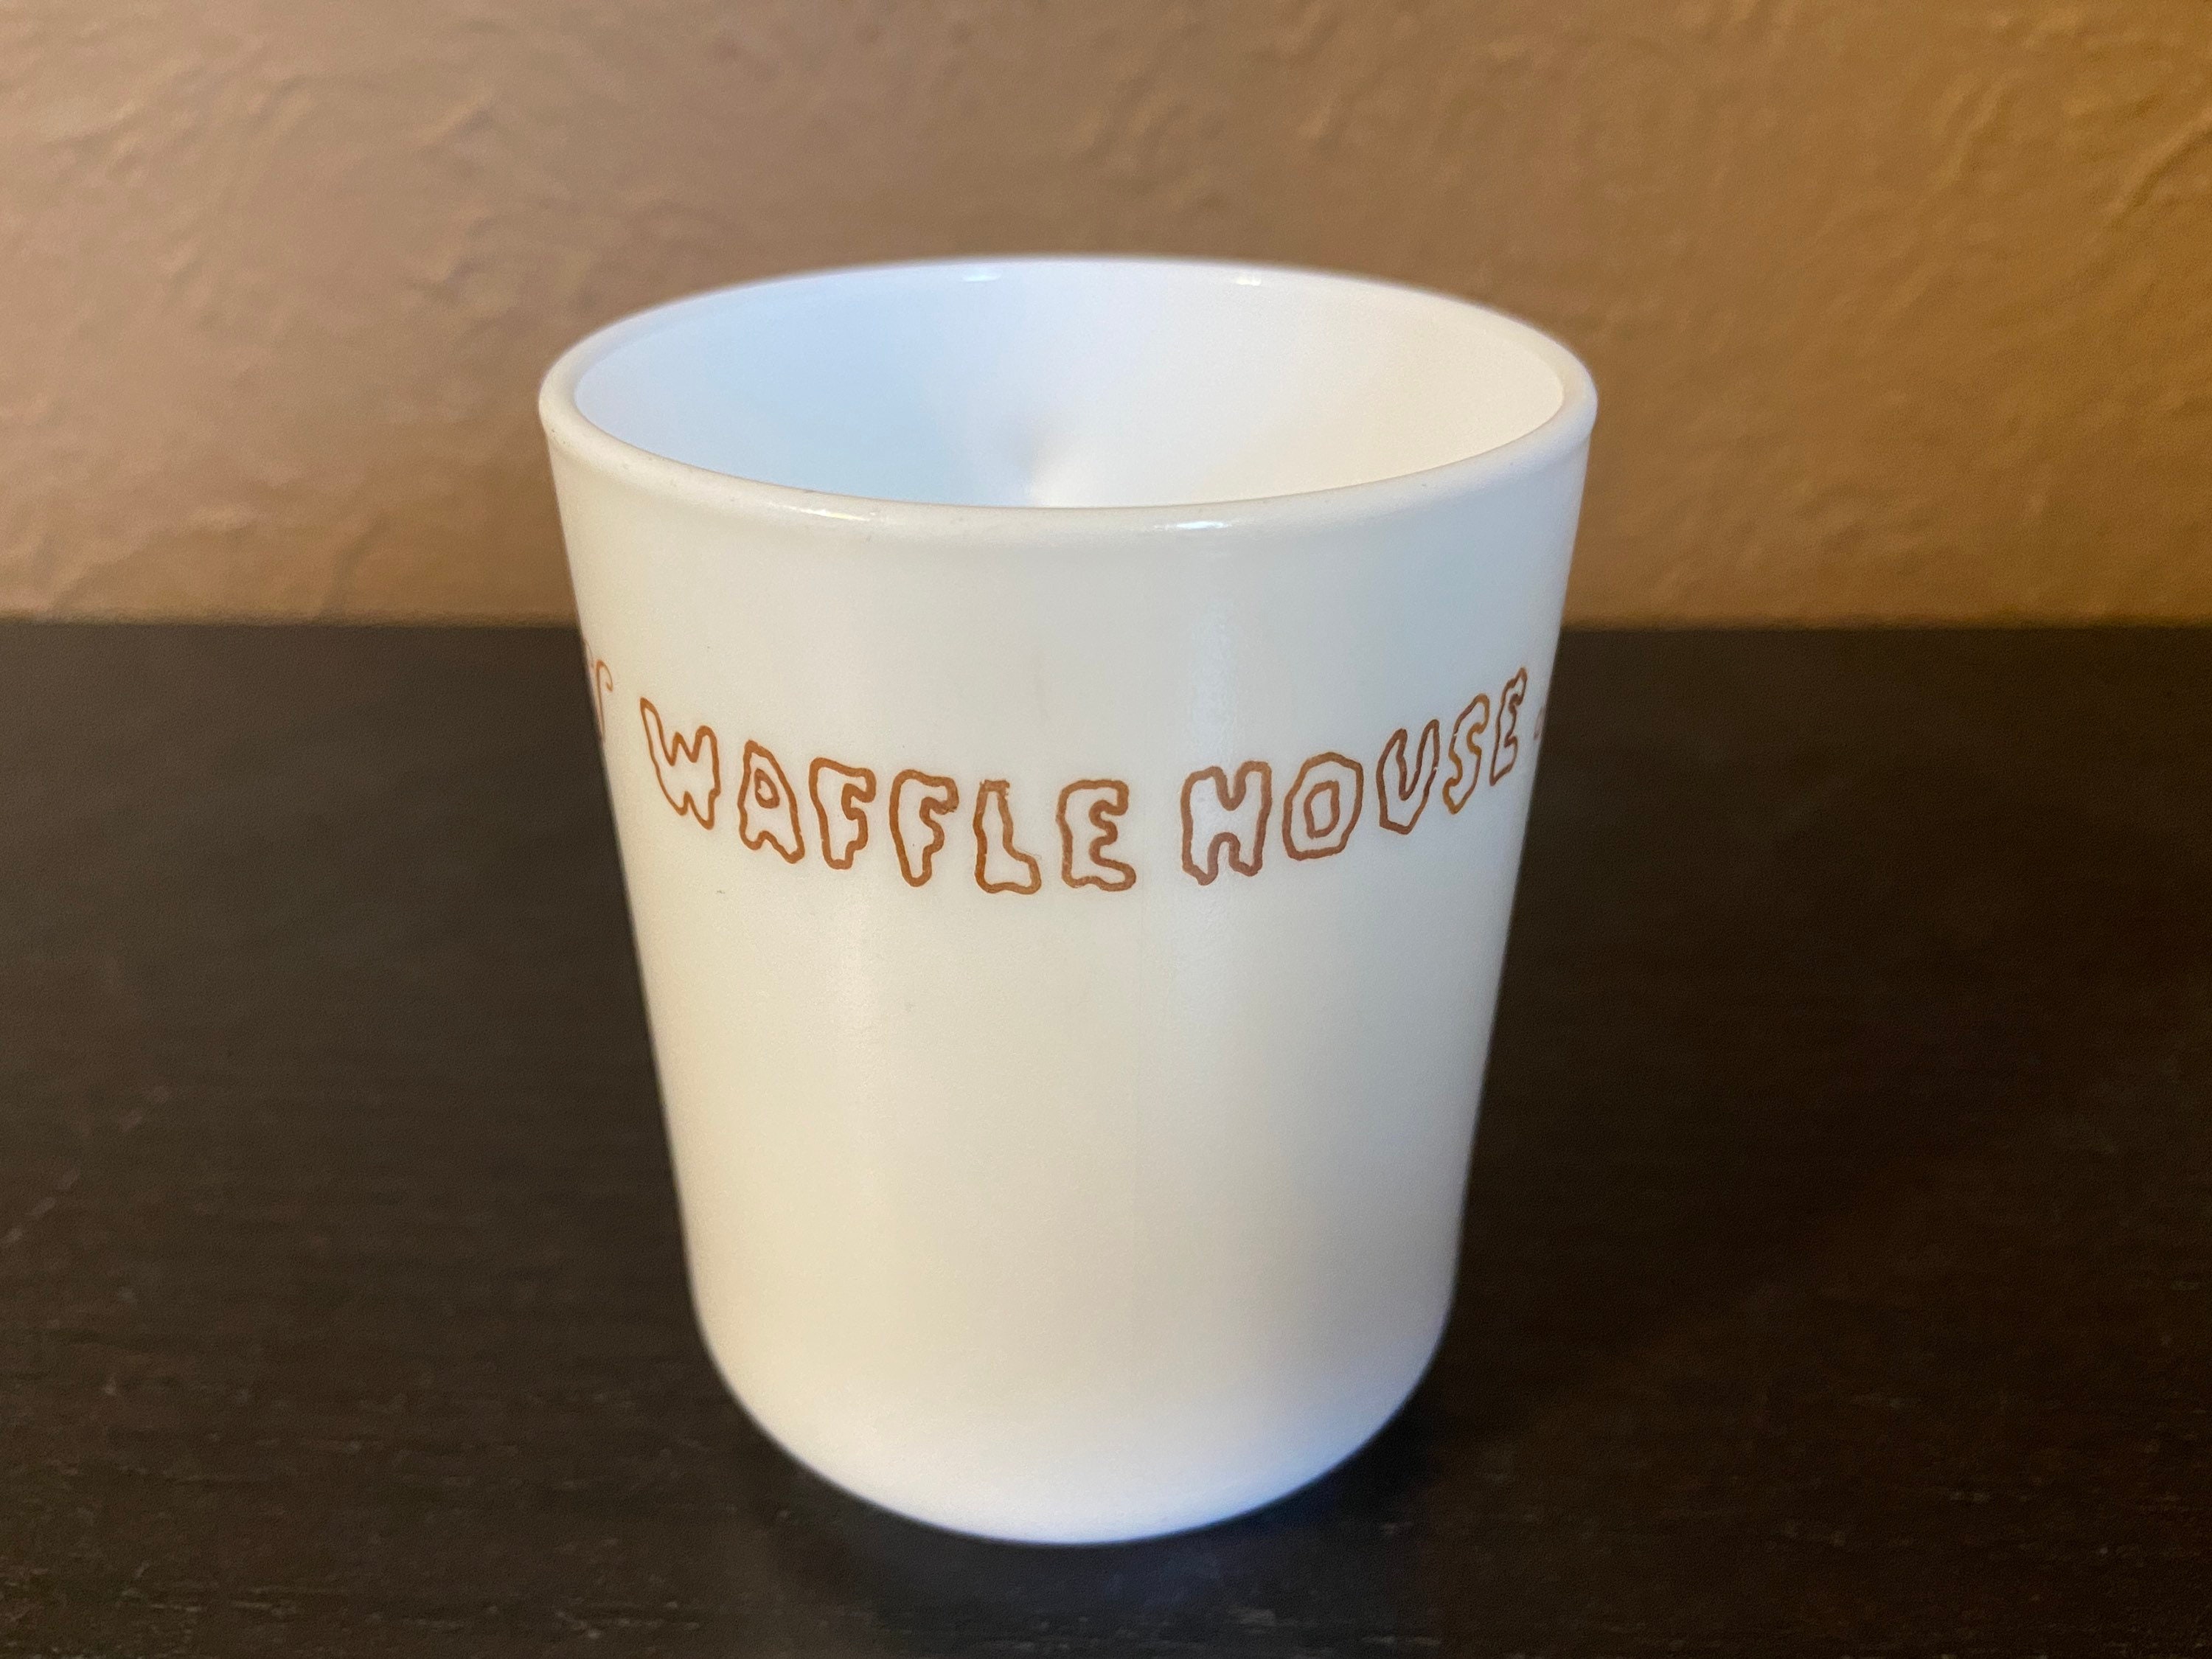 Vintage Waffle House Coffee Cup / Mug Regency Scroll Design on Milk Glass  made by Arcopal France. Excellent Old School Restaurant Ware. 